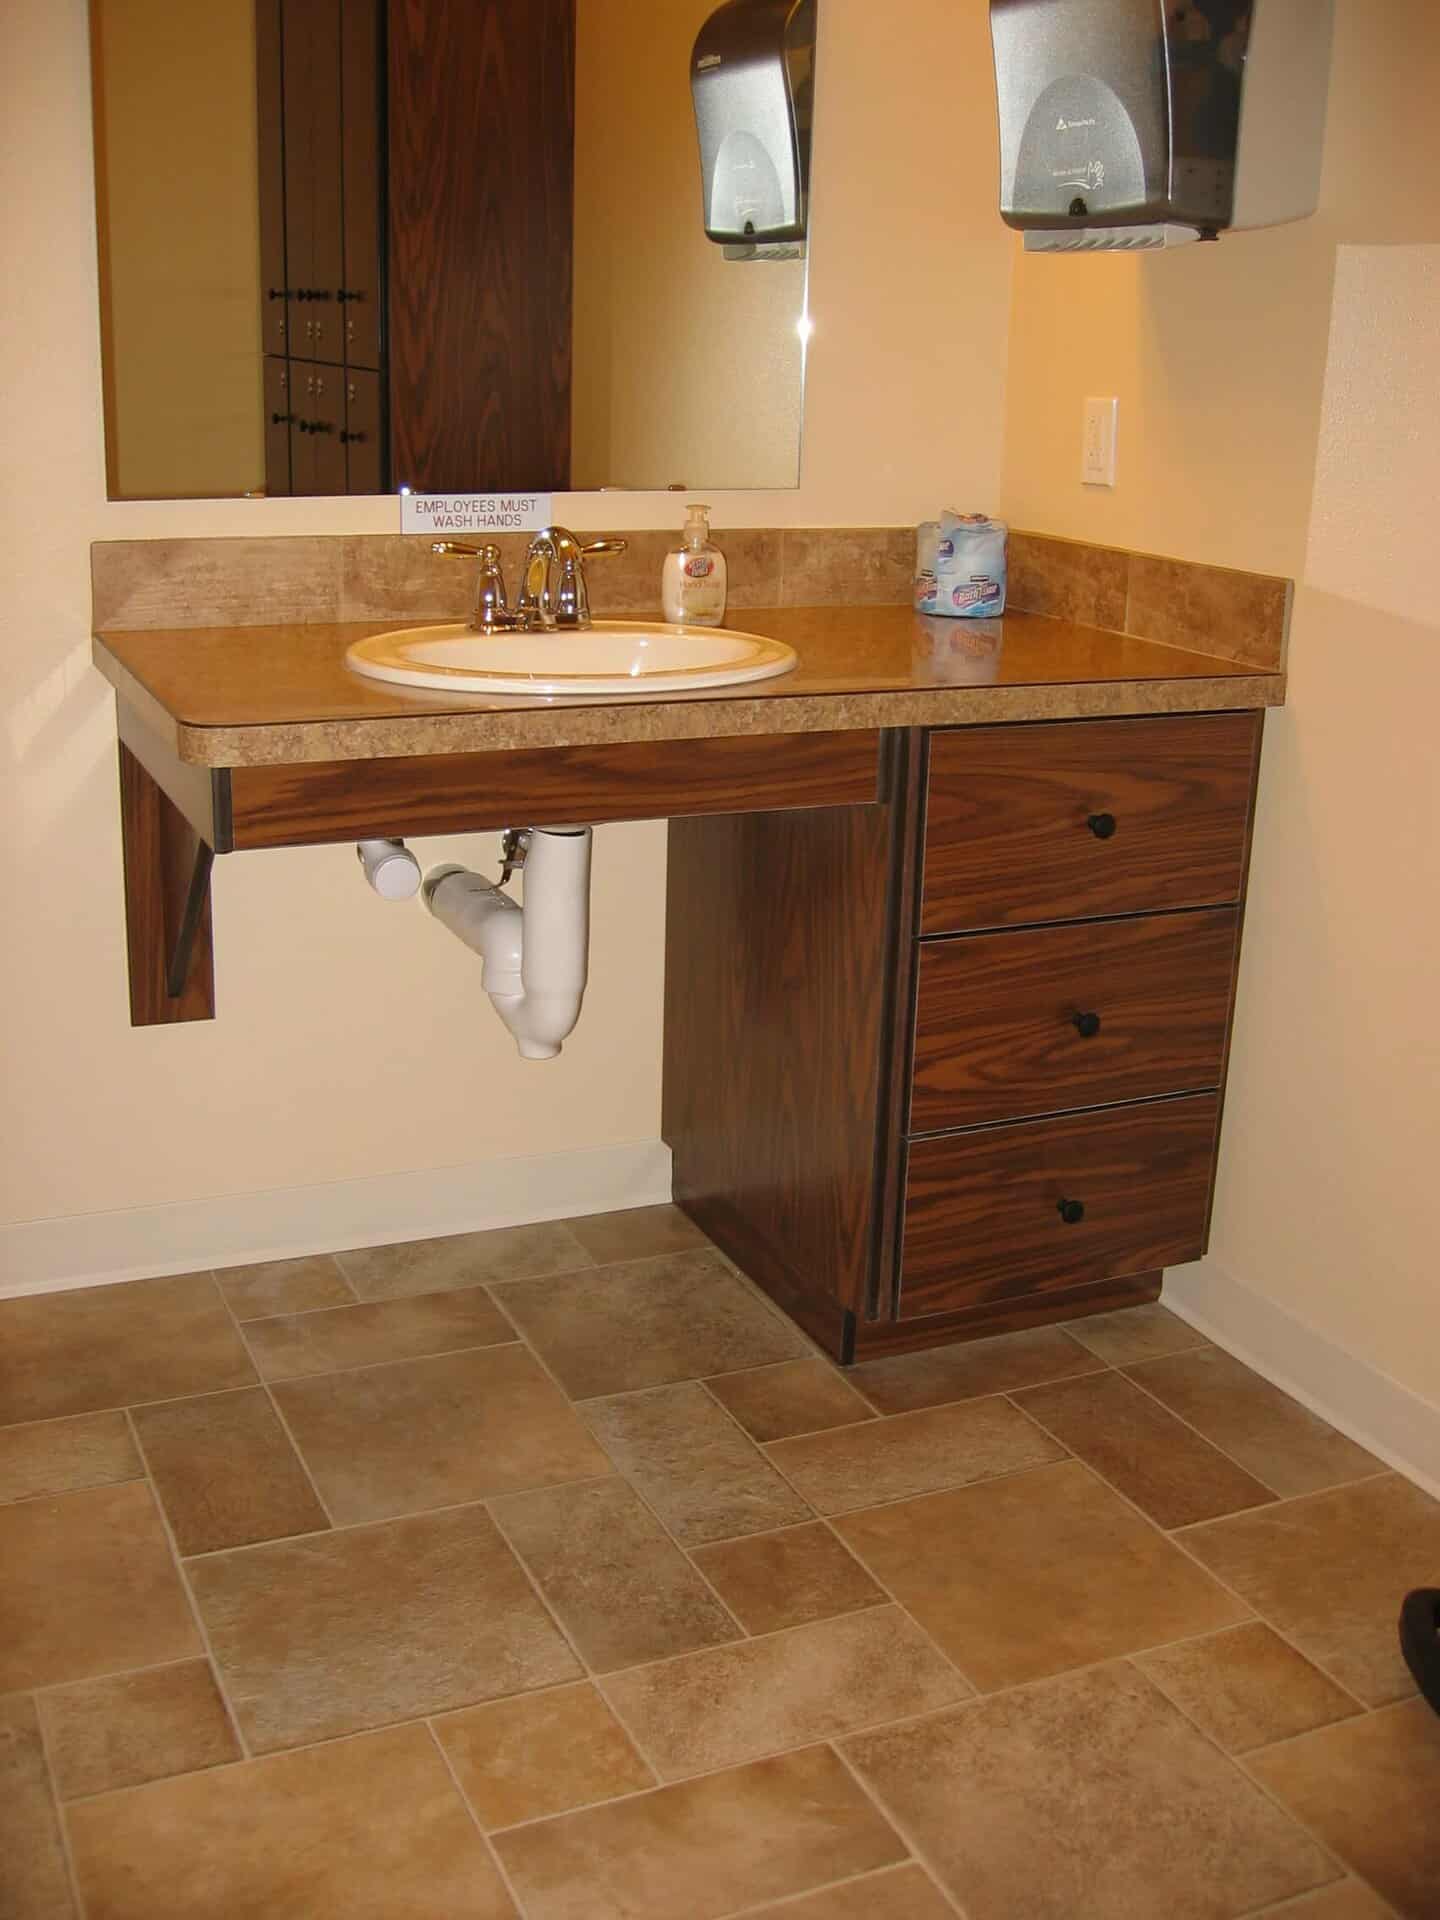 Picture of an office sink with ark wooden cabinets.